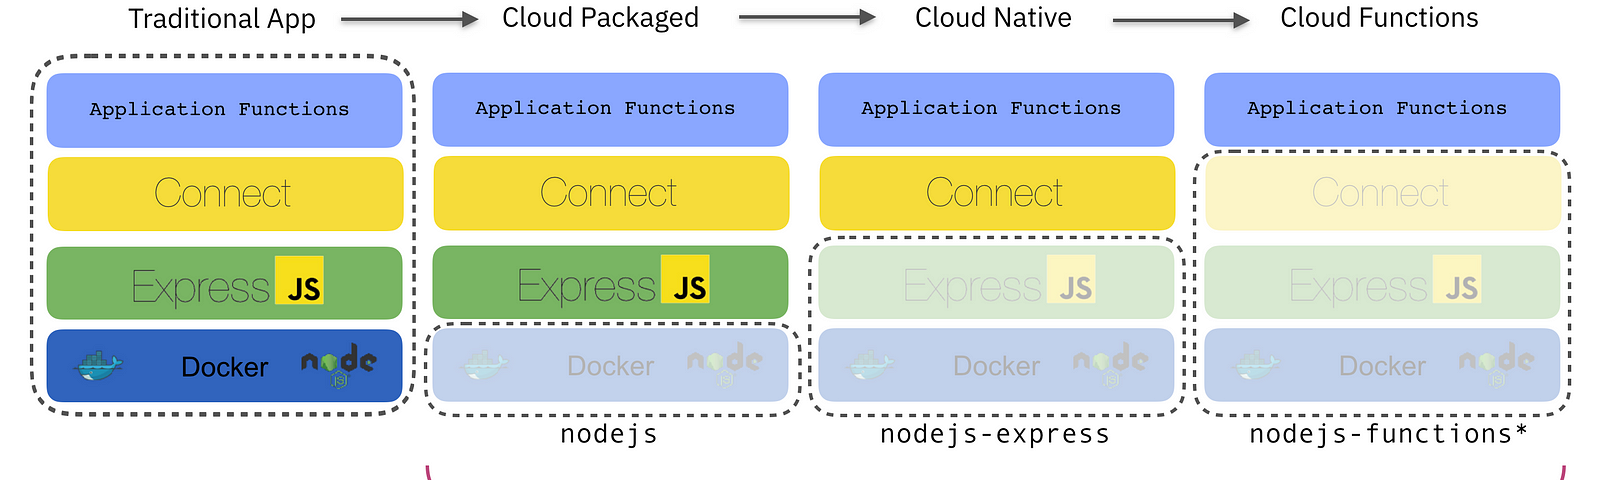 Diagram showing the range of stacks for Node.js, spanning those for Cloud Packaging, Cloud Native and Cloud Functions